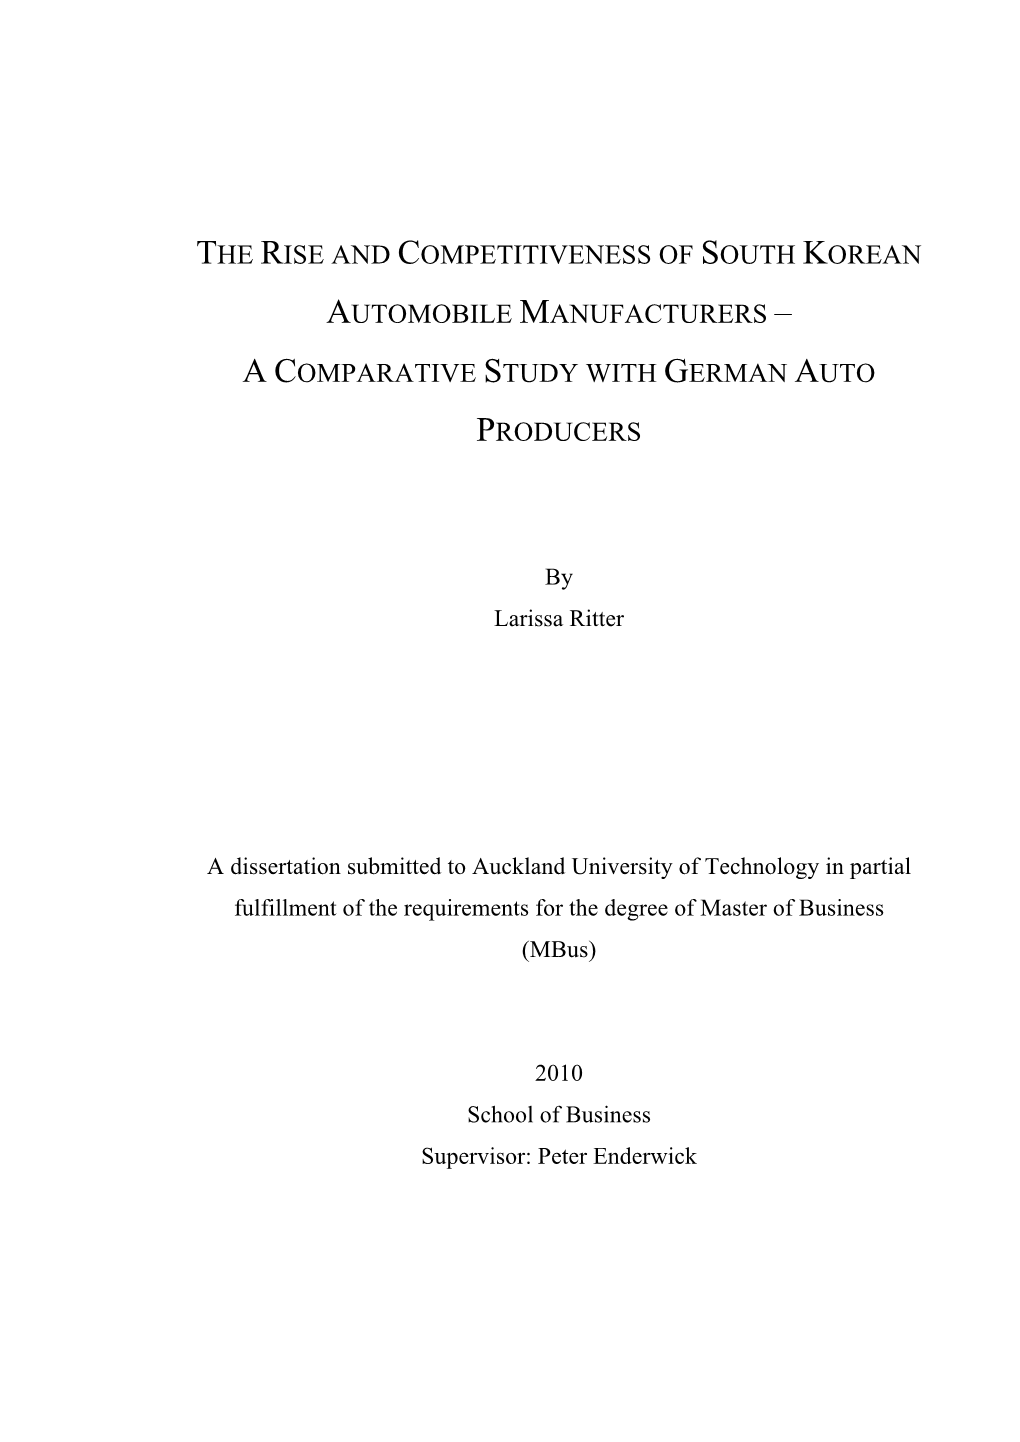 The Rise and Competitiveness of South Korean Automobile Manufacturers – a Comparative Study with German Auto Producers